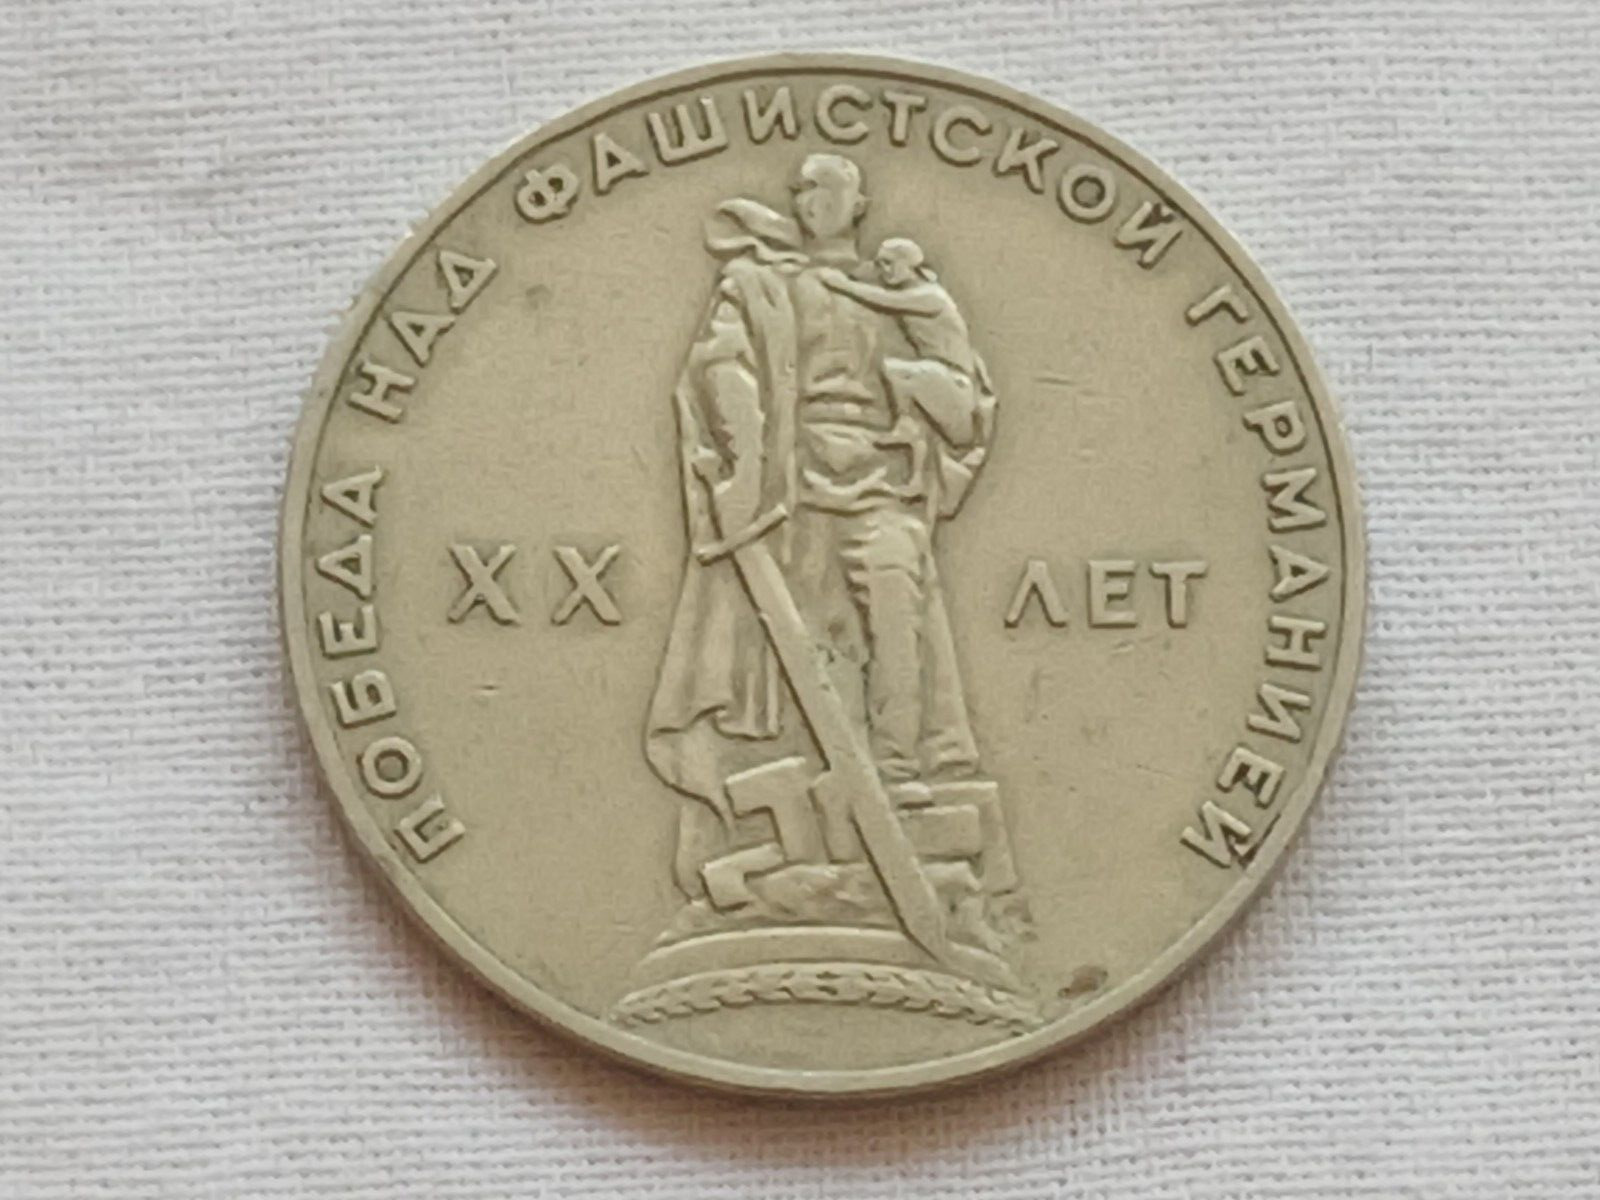 Soviet coin of the USSR 1 ruble 1965. 20th  Anniversary of World War II